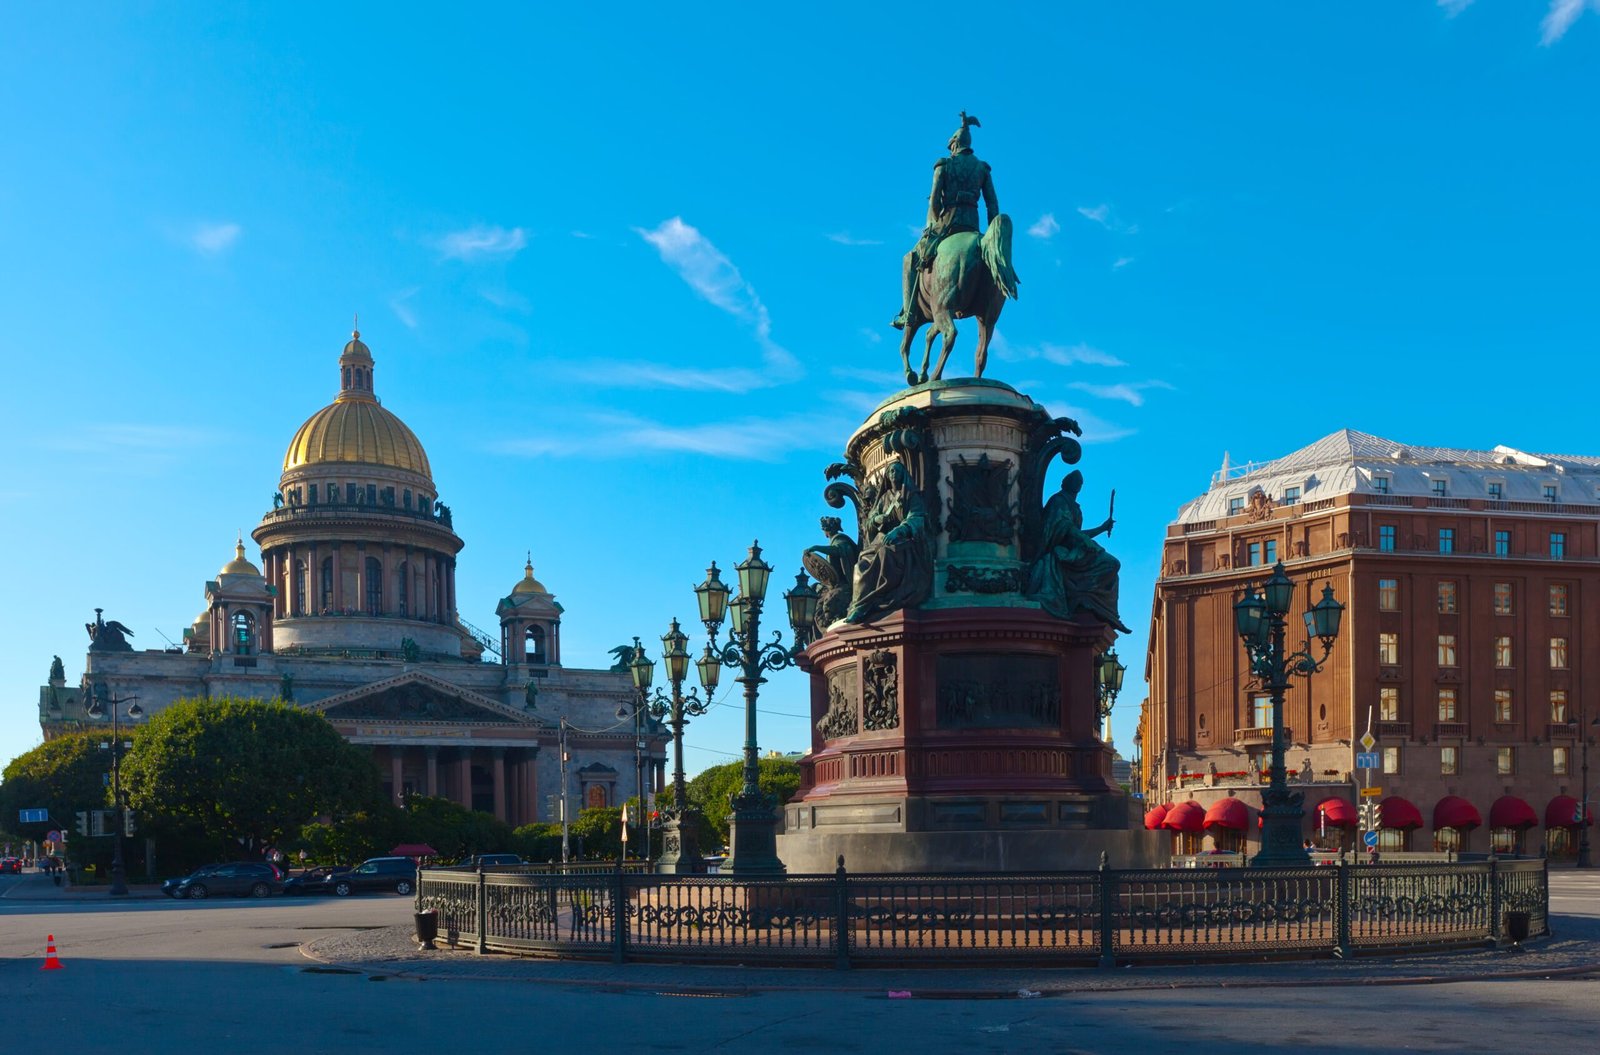 Monument of Nicholas I of Russia on St. Isaac's Square. Saint Petersburg, Russia